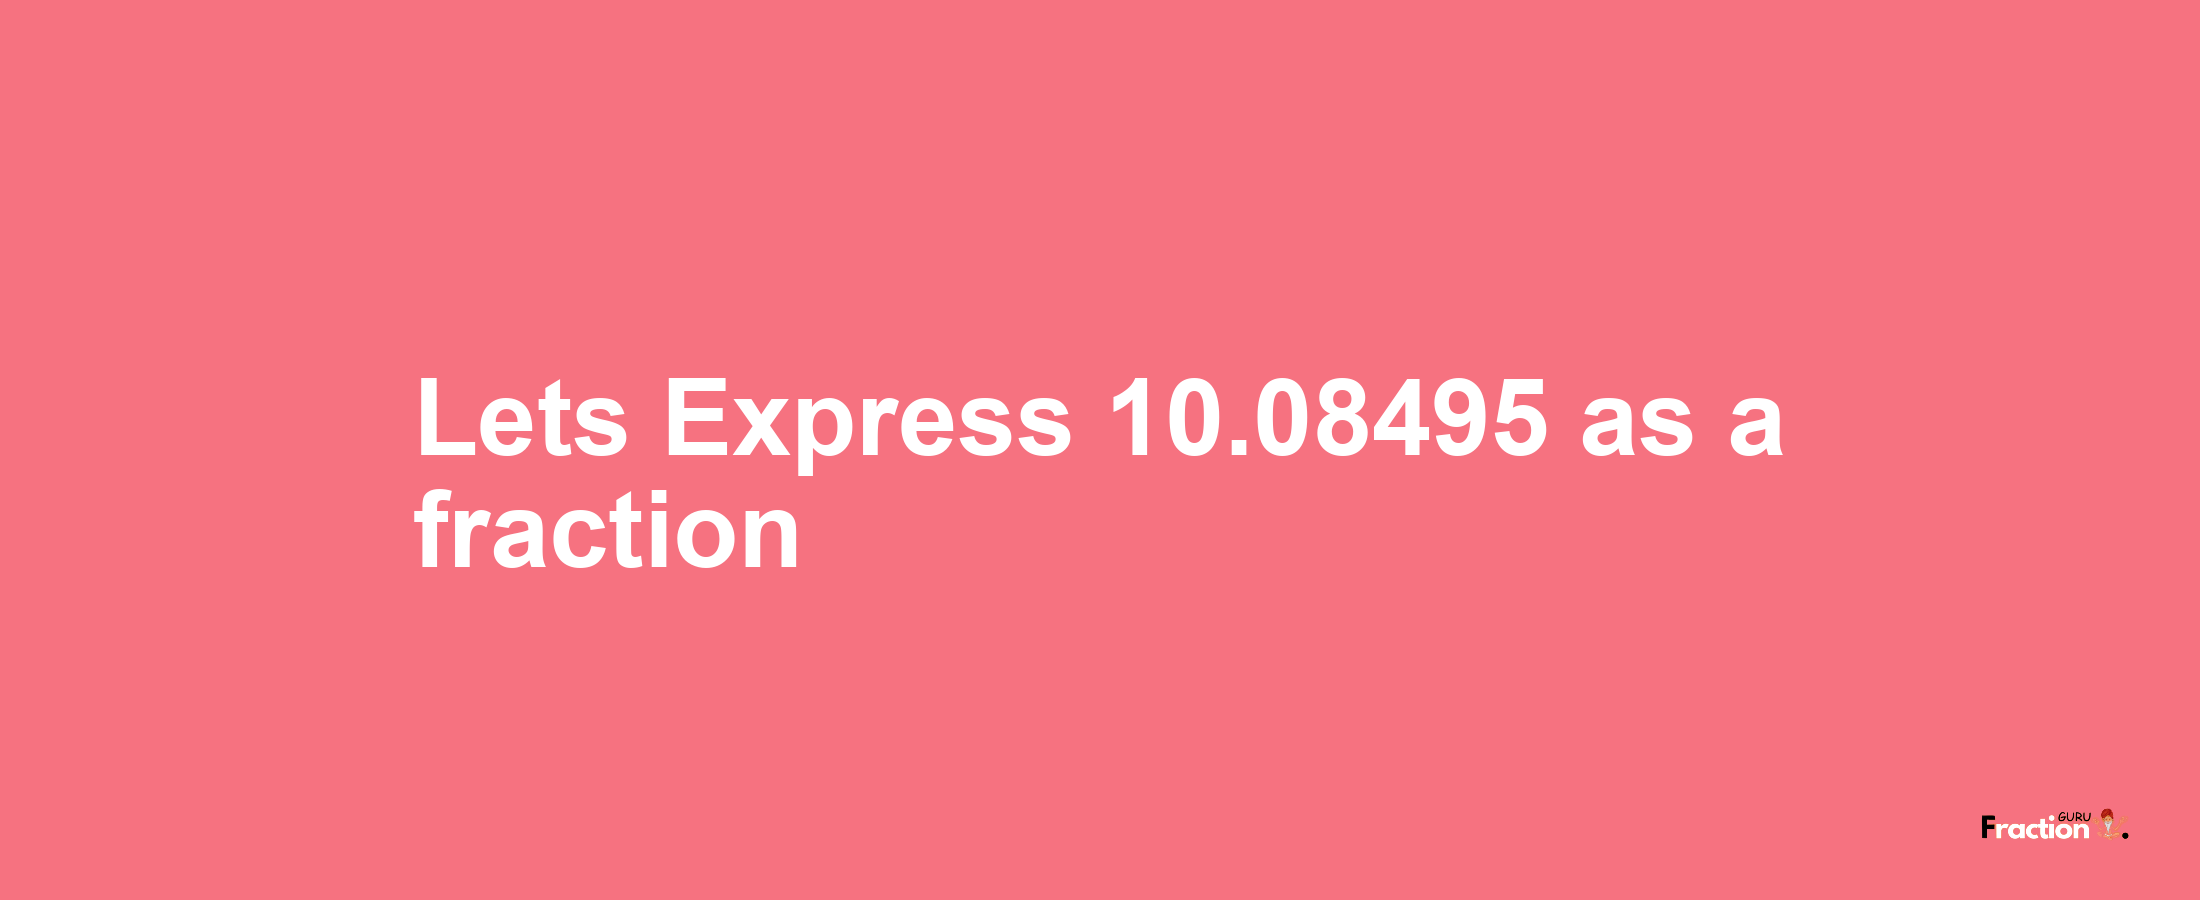 Lets Express 10.08495 as afraction